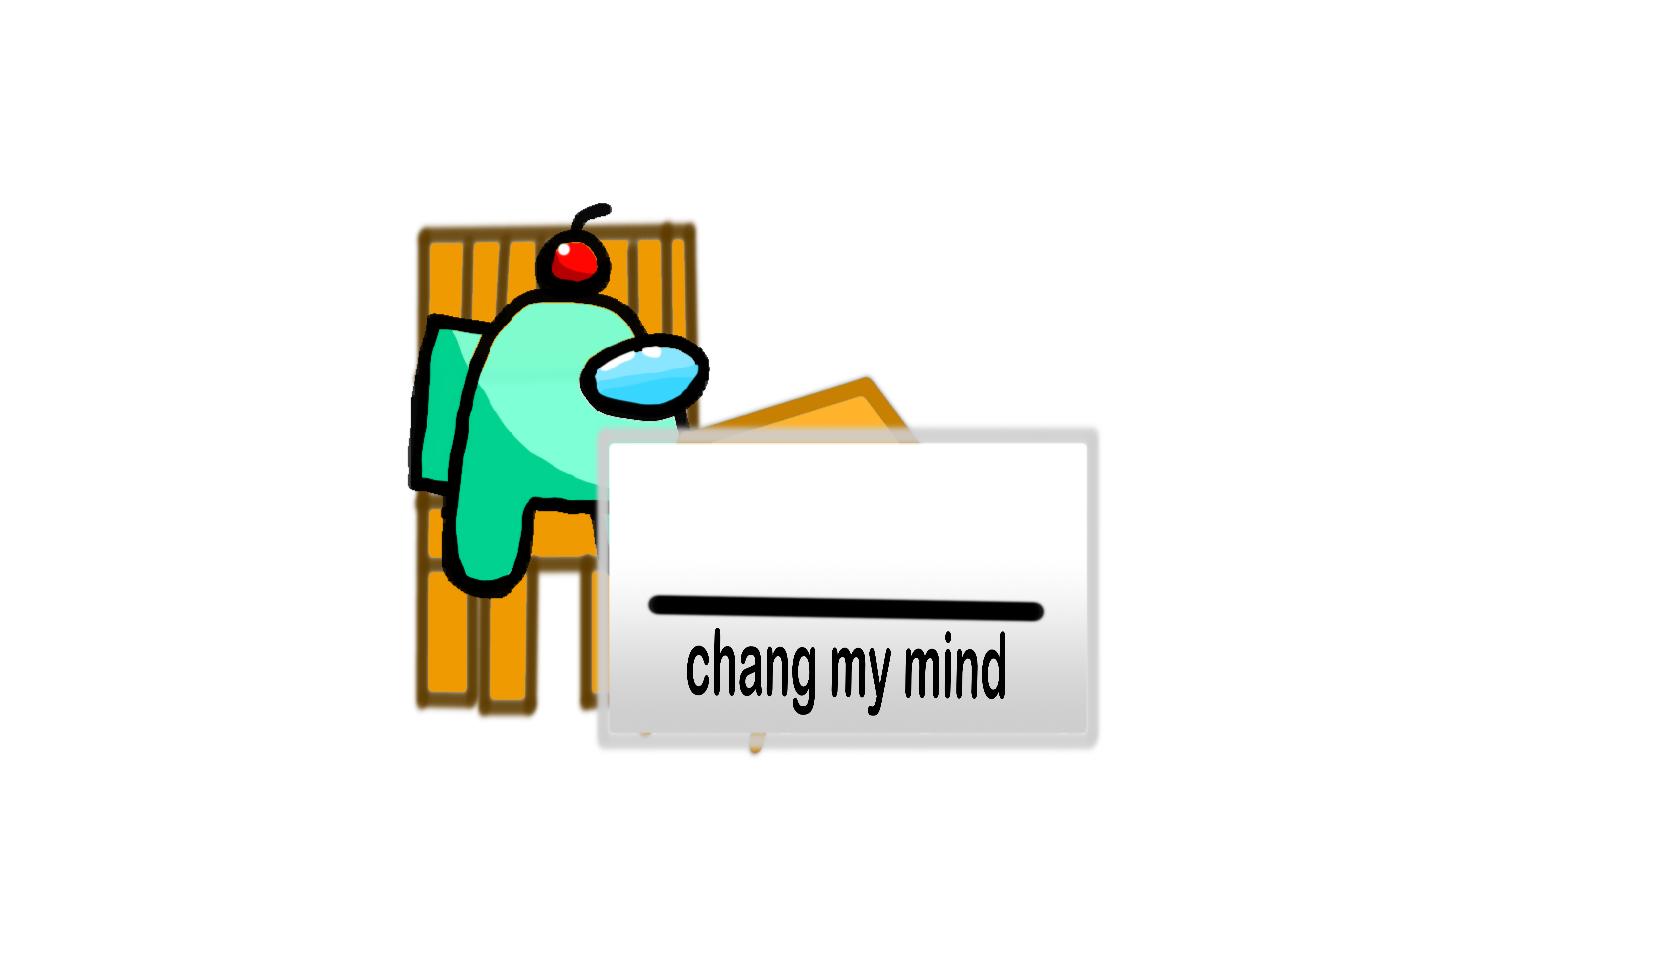 High Quality auqa chang my mind Blank Meme Template